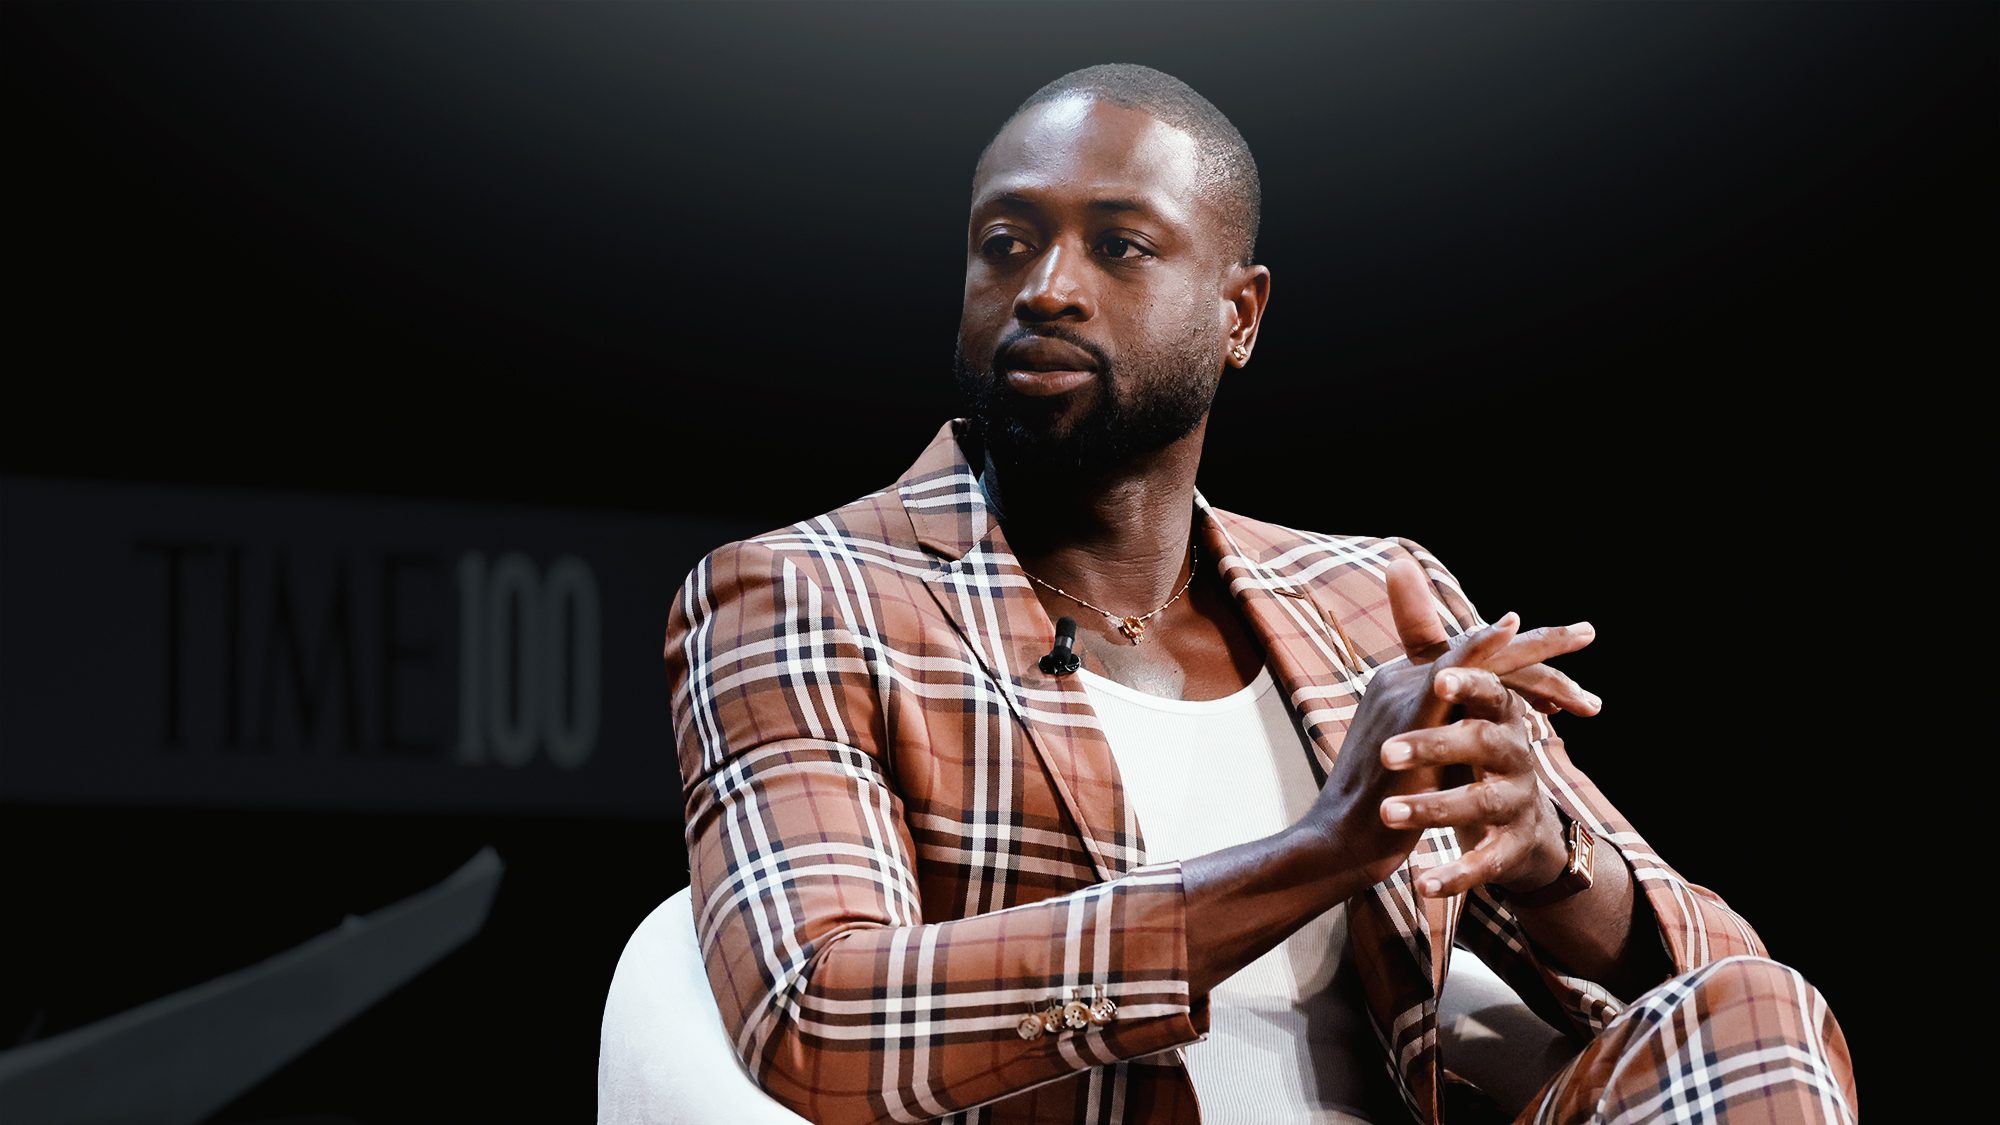 Dwyane Wade responds to ex-wife objecting over name change of